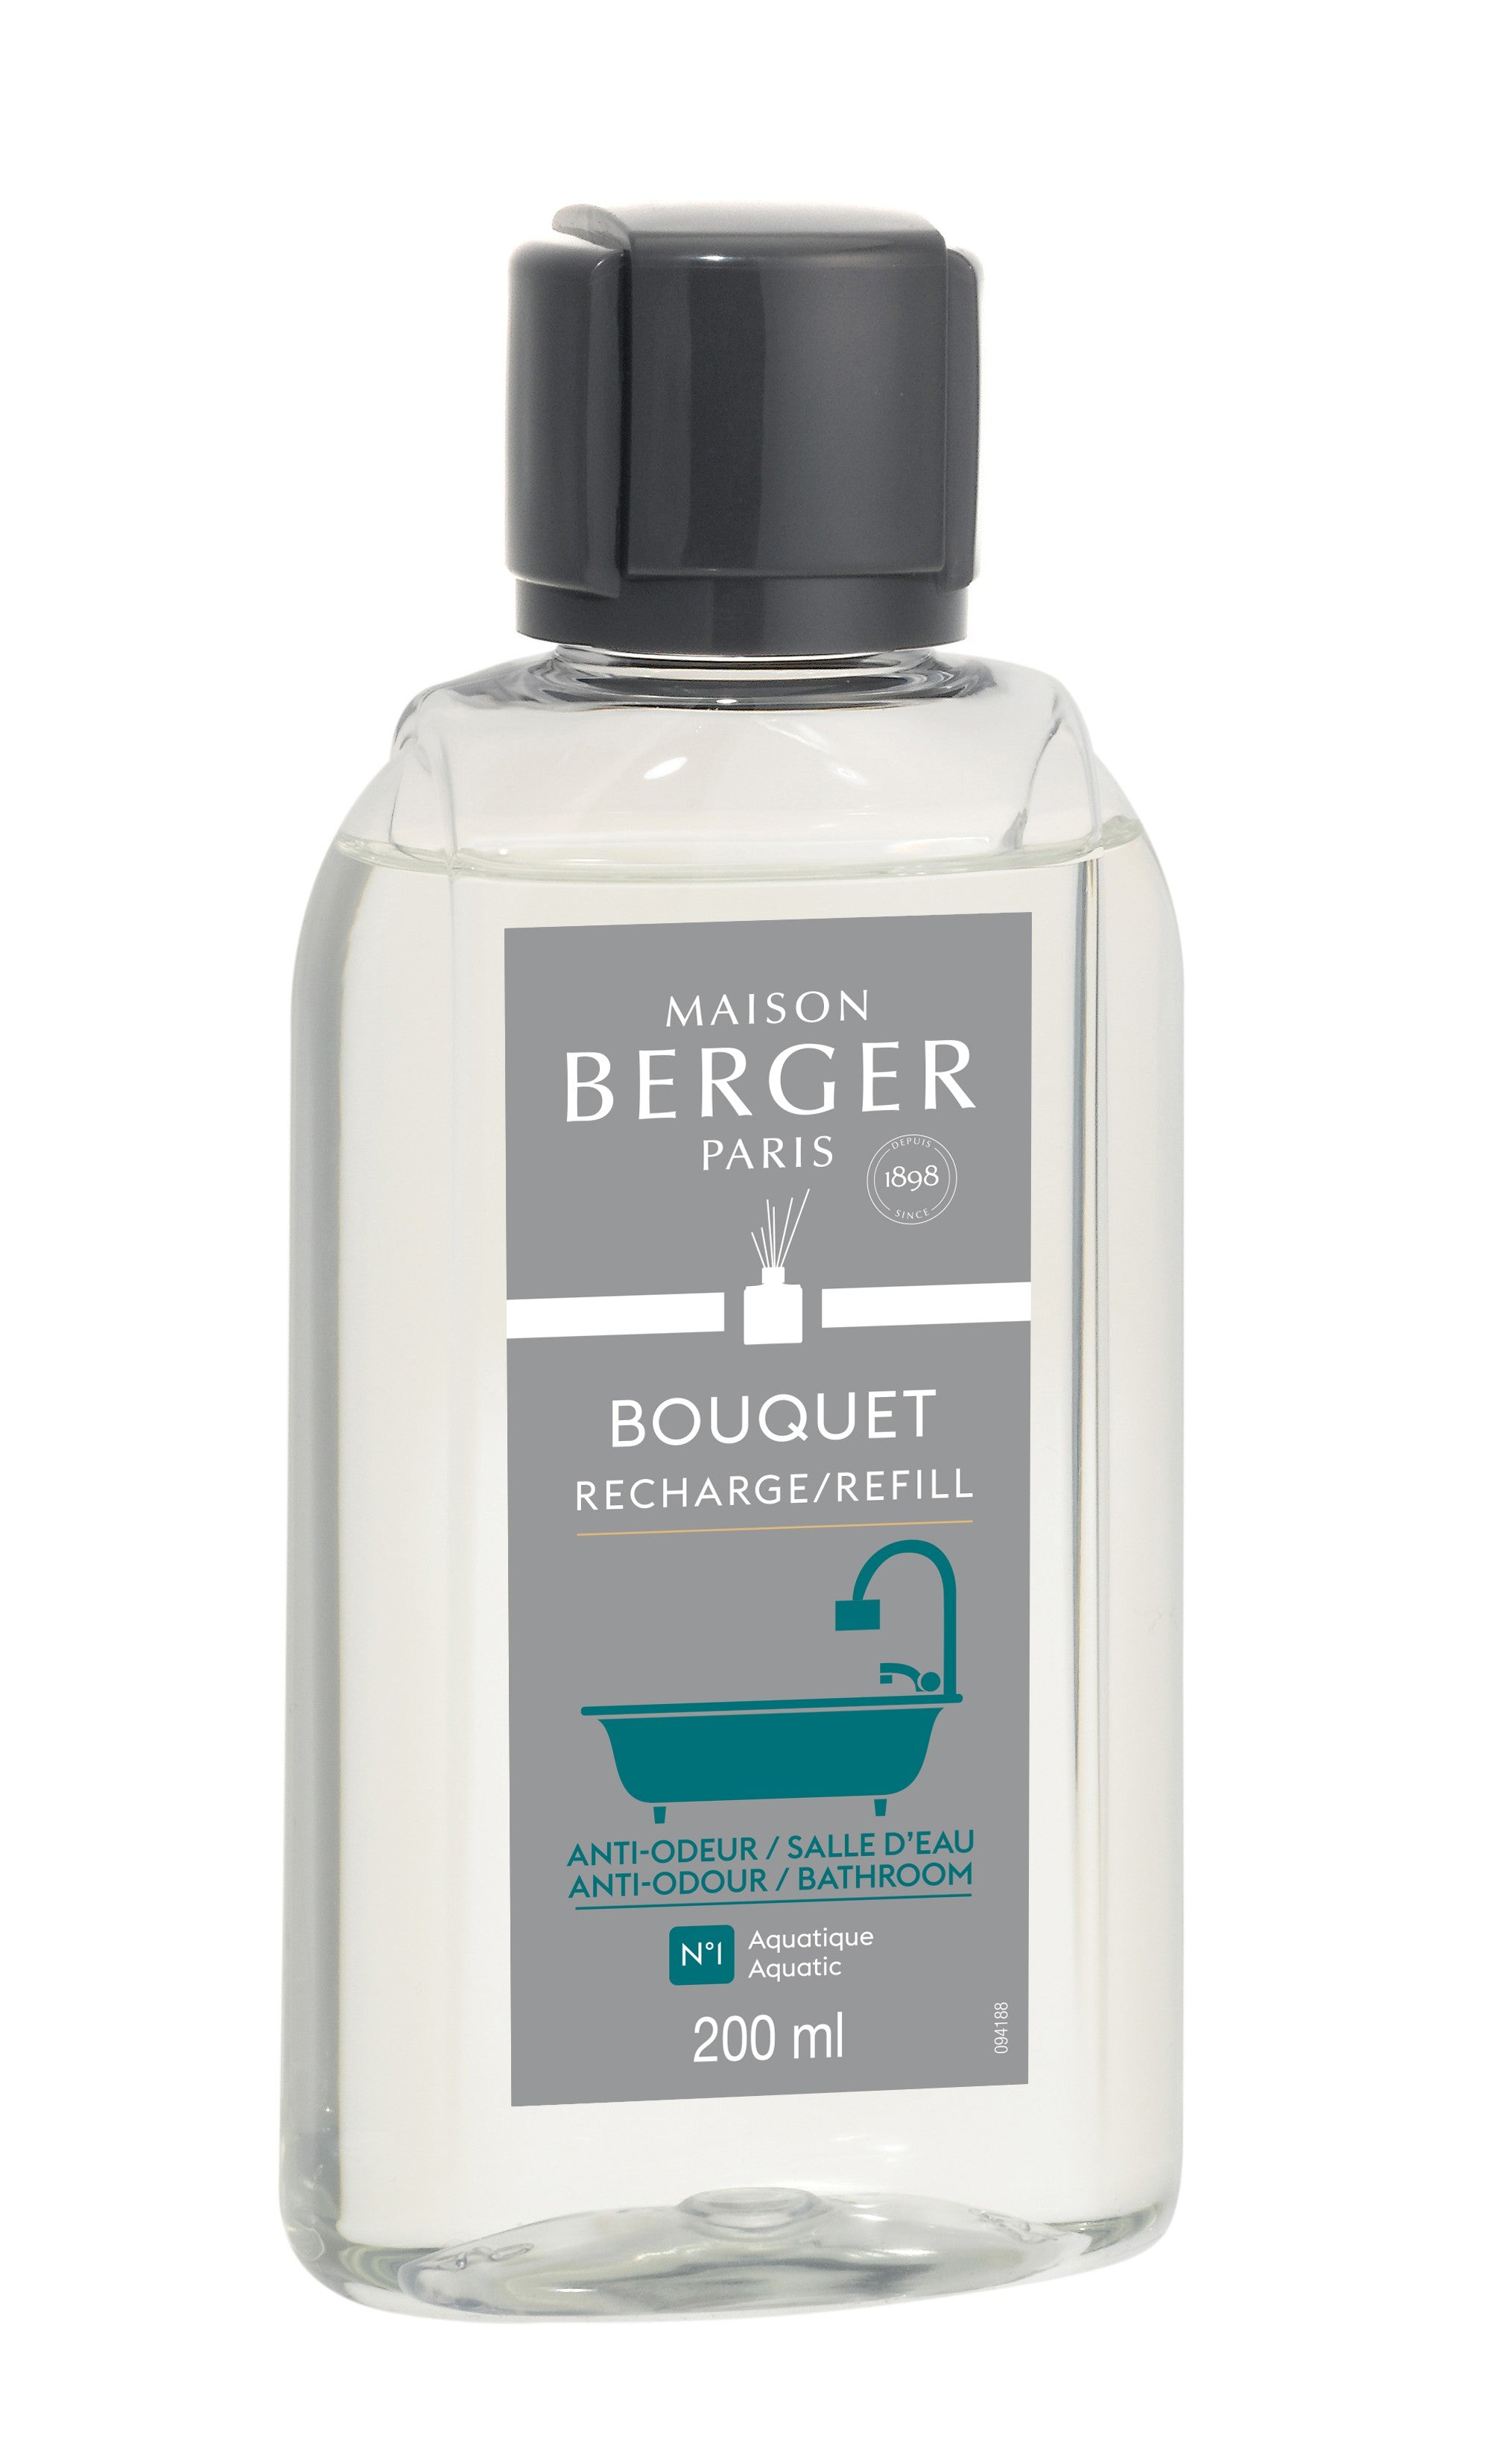 Bathroom - Free from Unpleasant Odours - Duftpinde Refill - Maison Berger